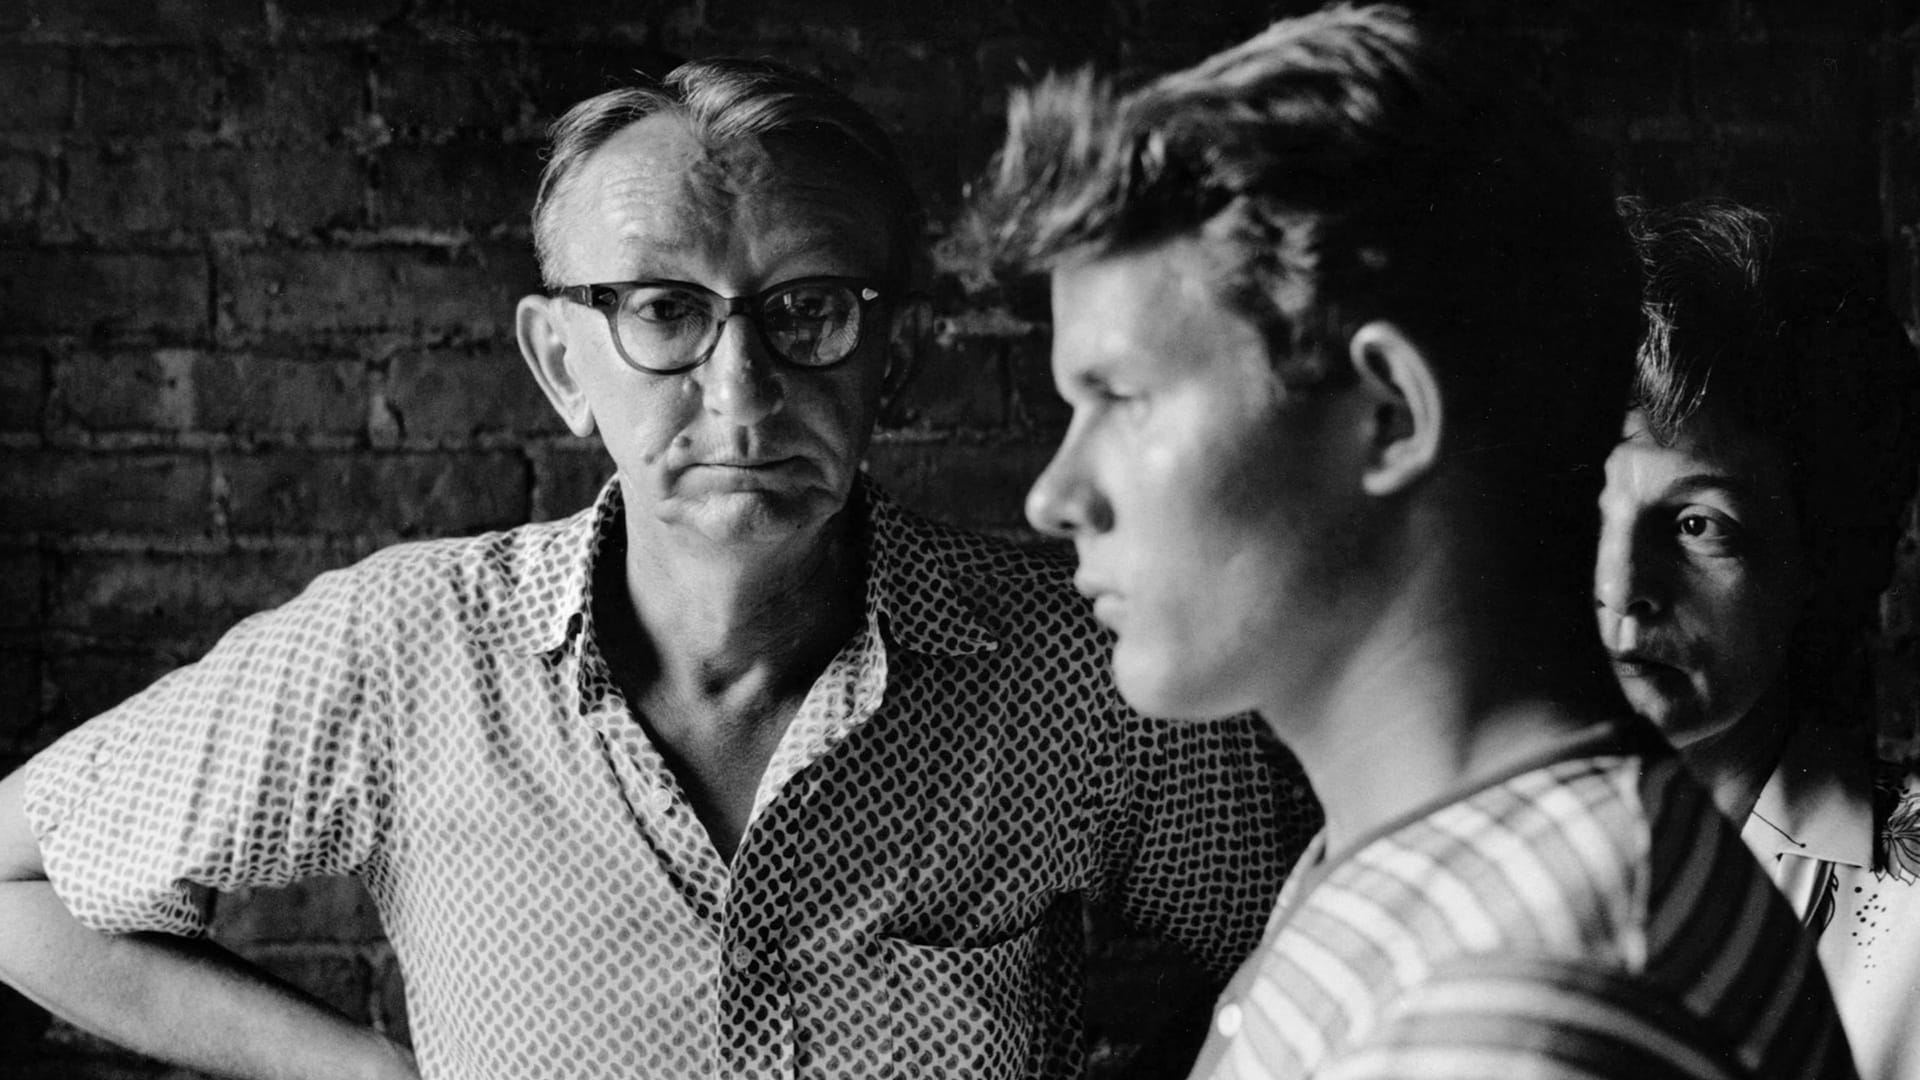 The Tumultuous Relationship Between Duane Michals and his Father